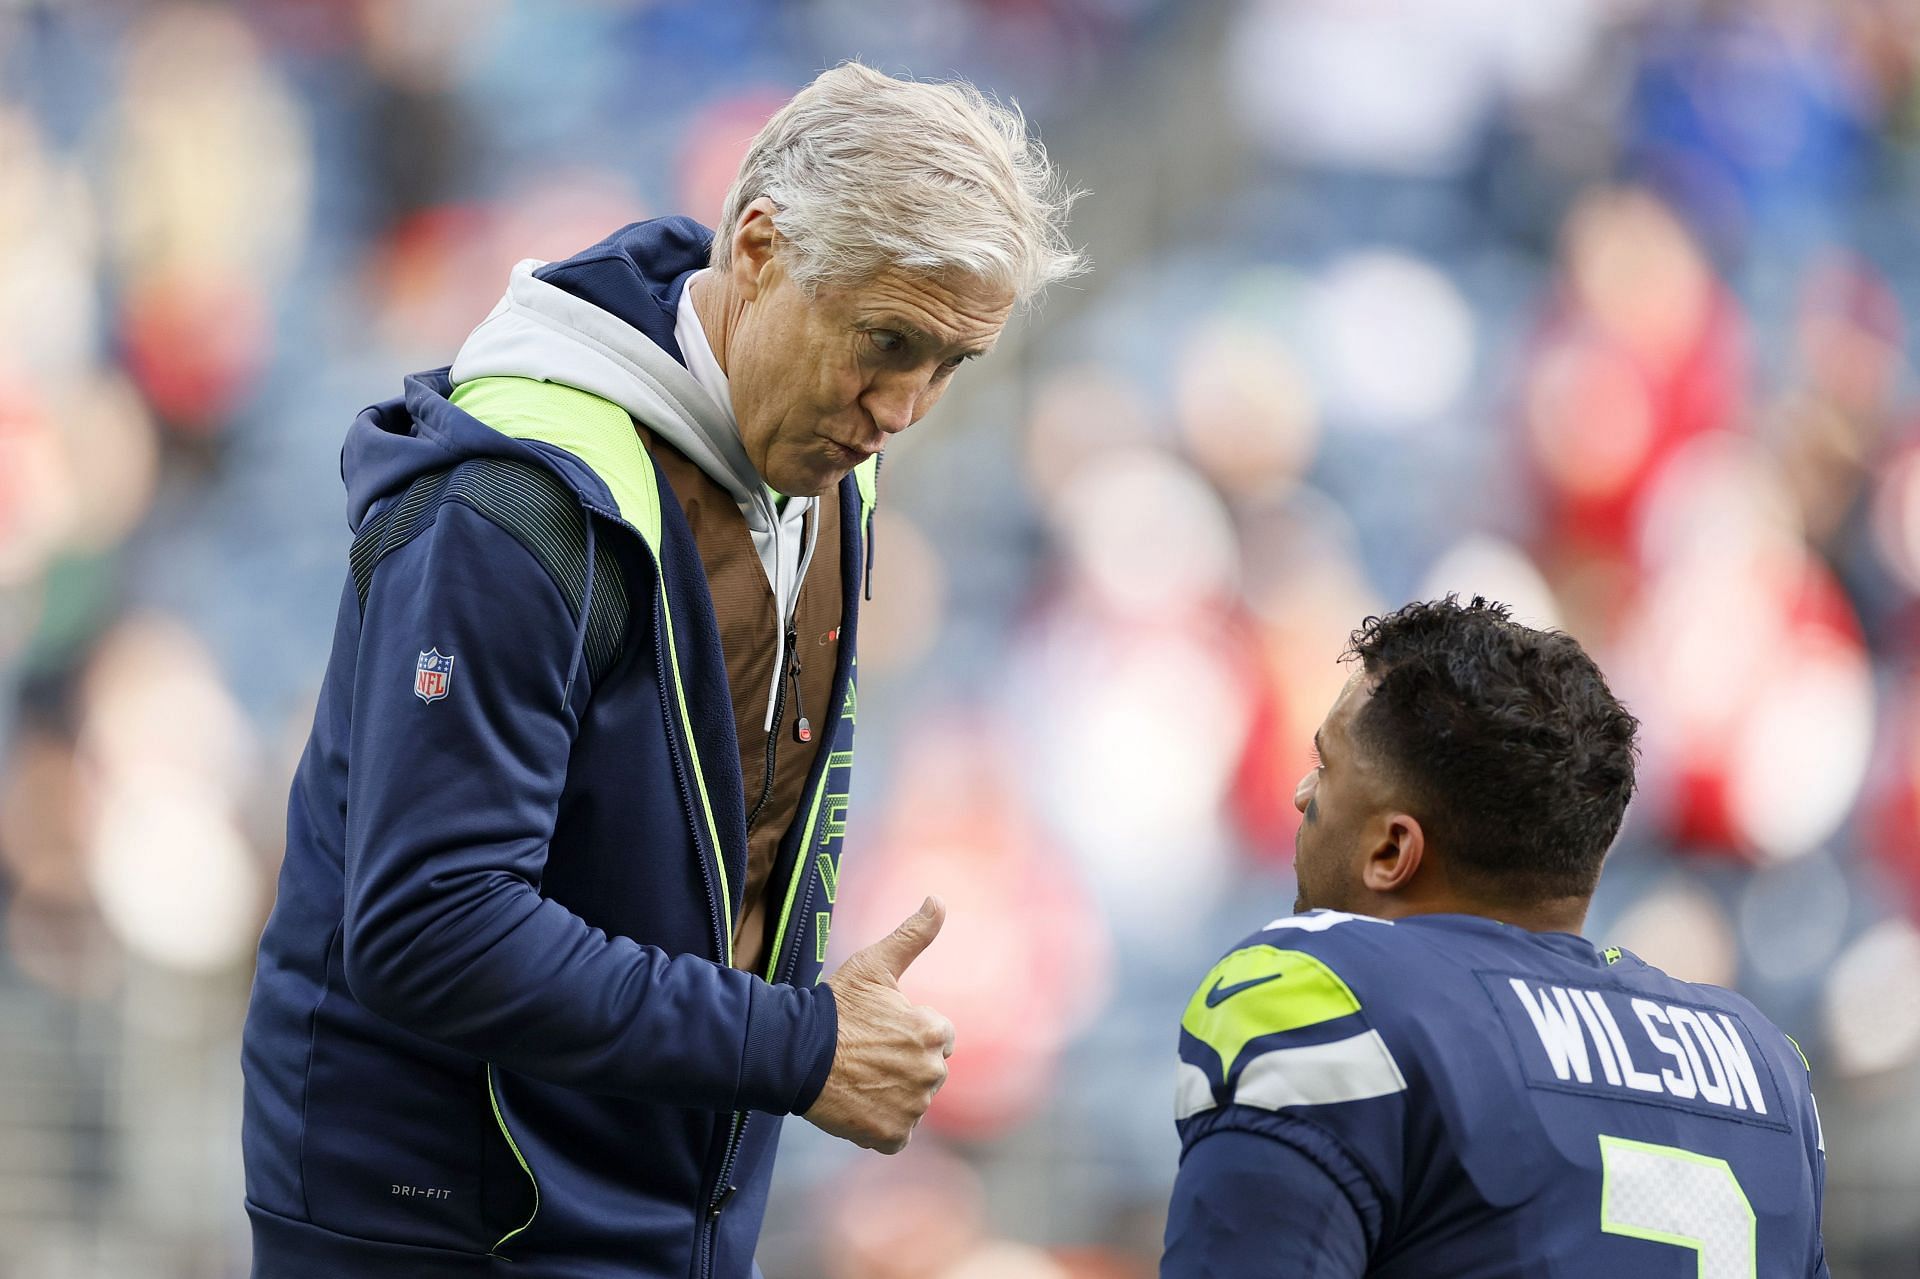 Losing the services of Russell Wilson doomed Seattle to the bottom of the NFL standings (Photo: Getty)